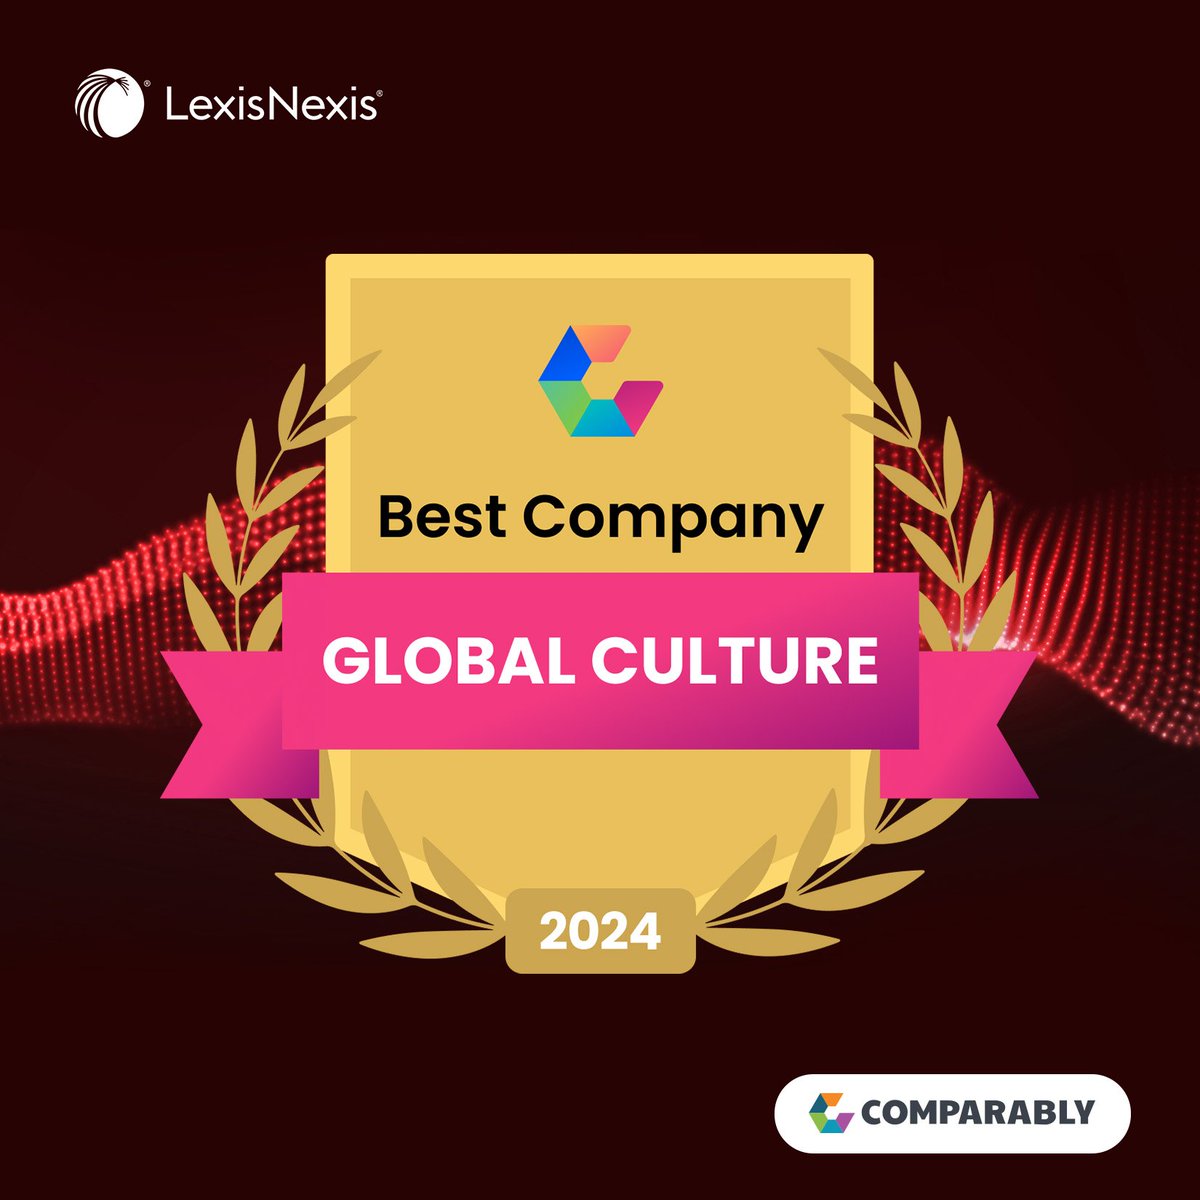 .@LexisNexis has been named one of the companies with Best Global Culture by Comparably! Are you ready to be a part of our dynamic team? Explore career opportunities with LexisNexis and join us in shaping a more just world! bit.ly/2QxKY8M